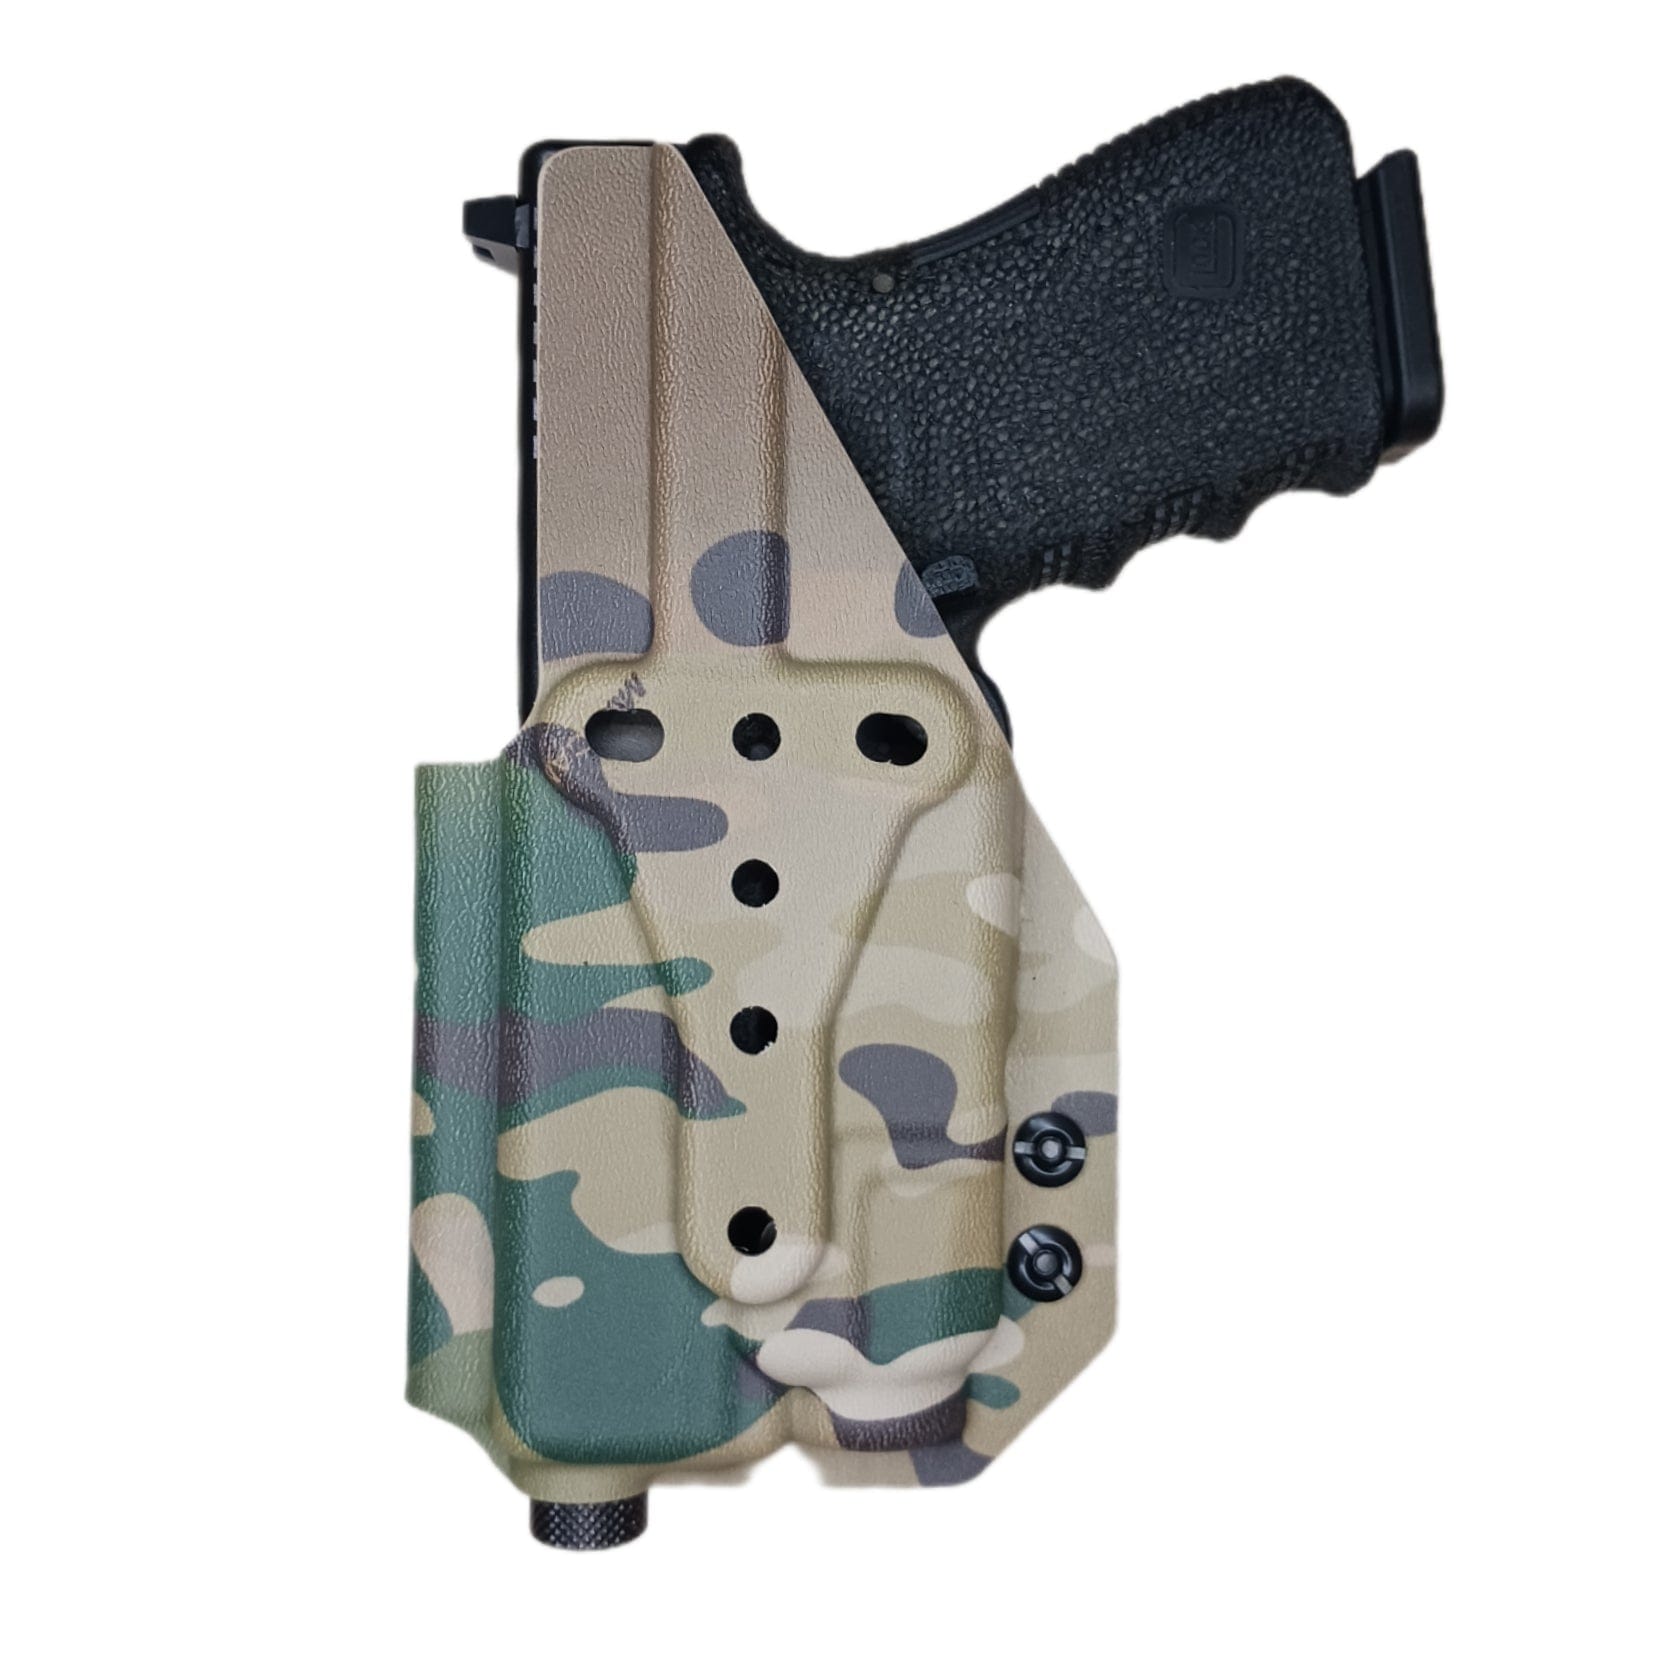 OCW Light Compatible Holster + TLR-7タイプ-